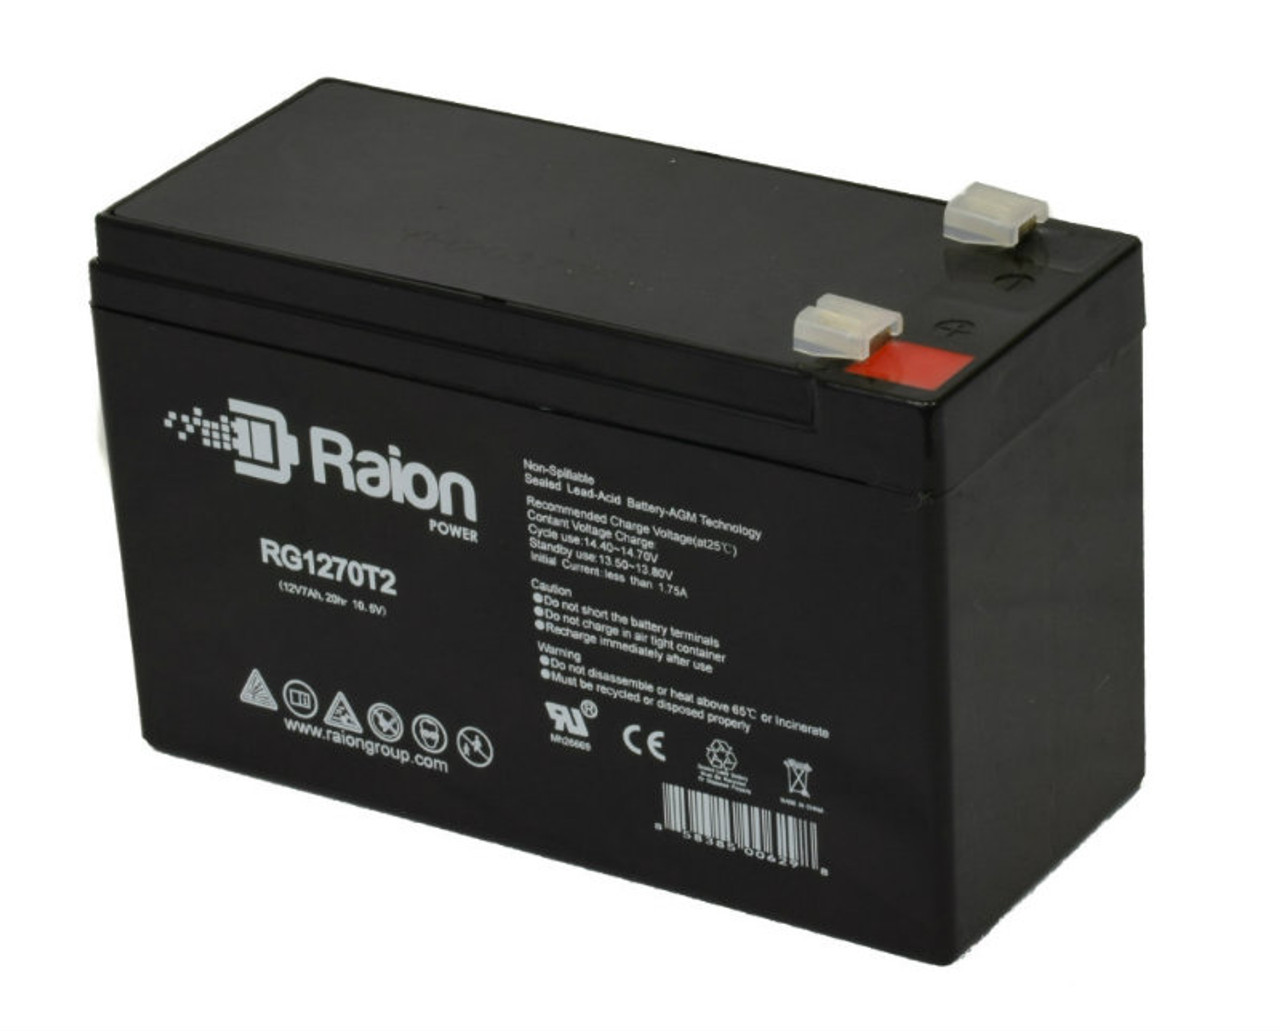 Raion Power RG1270T1 12V 7Ah Non-Spillable Replacement Battery for Ferno-ille POWERFlexx Powered Cot